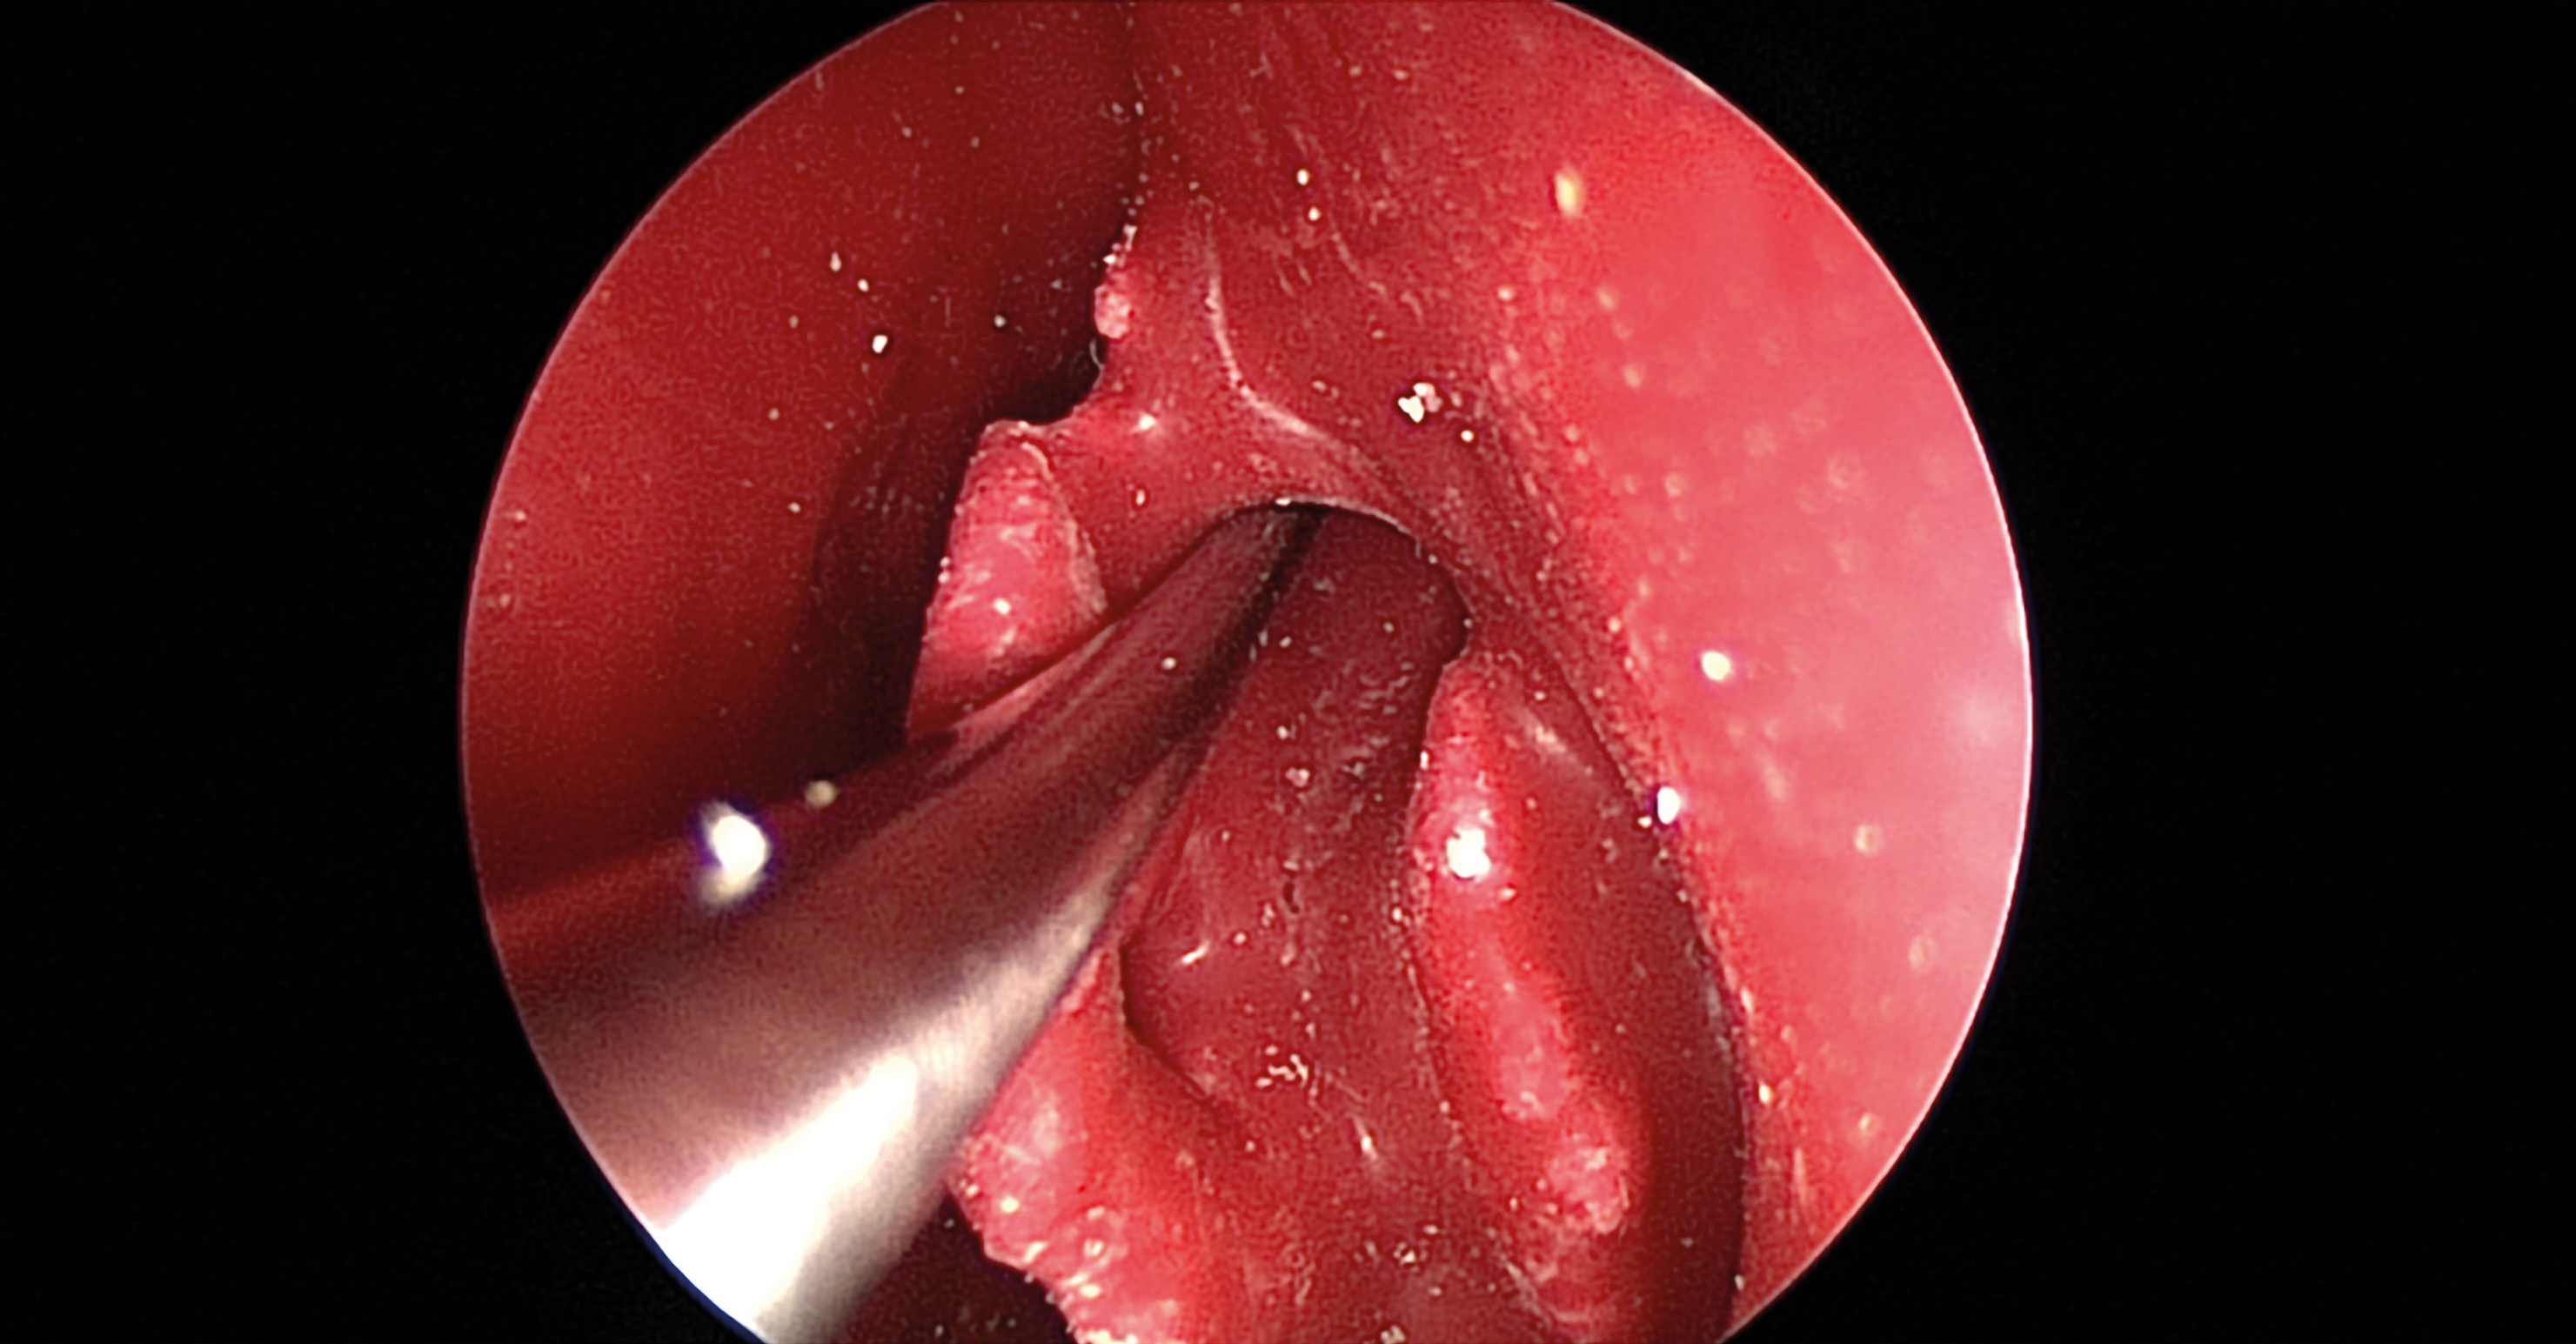 Endoscopic view without navigation